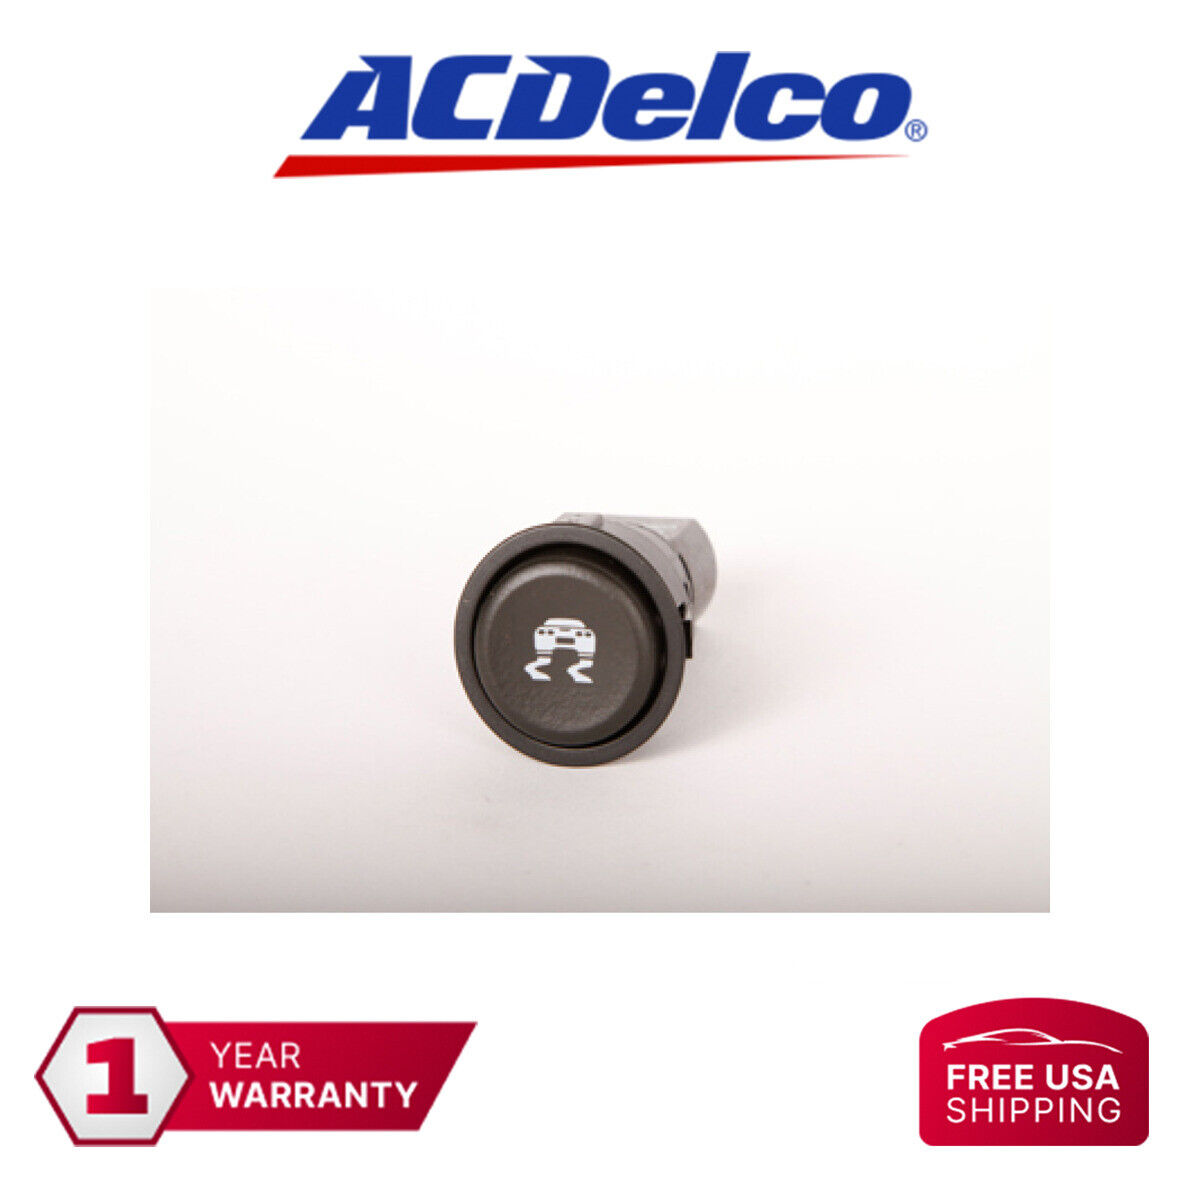 ACDelco Traction Control Switch 15148444